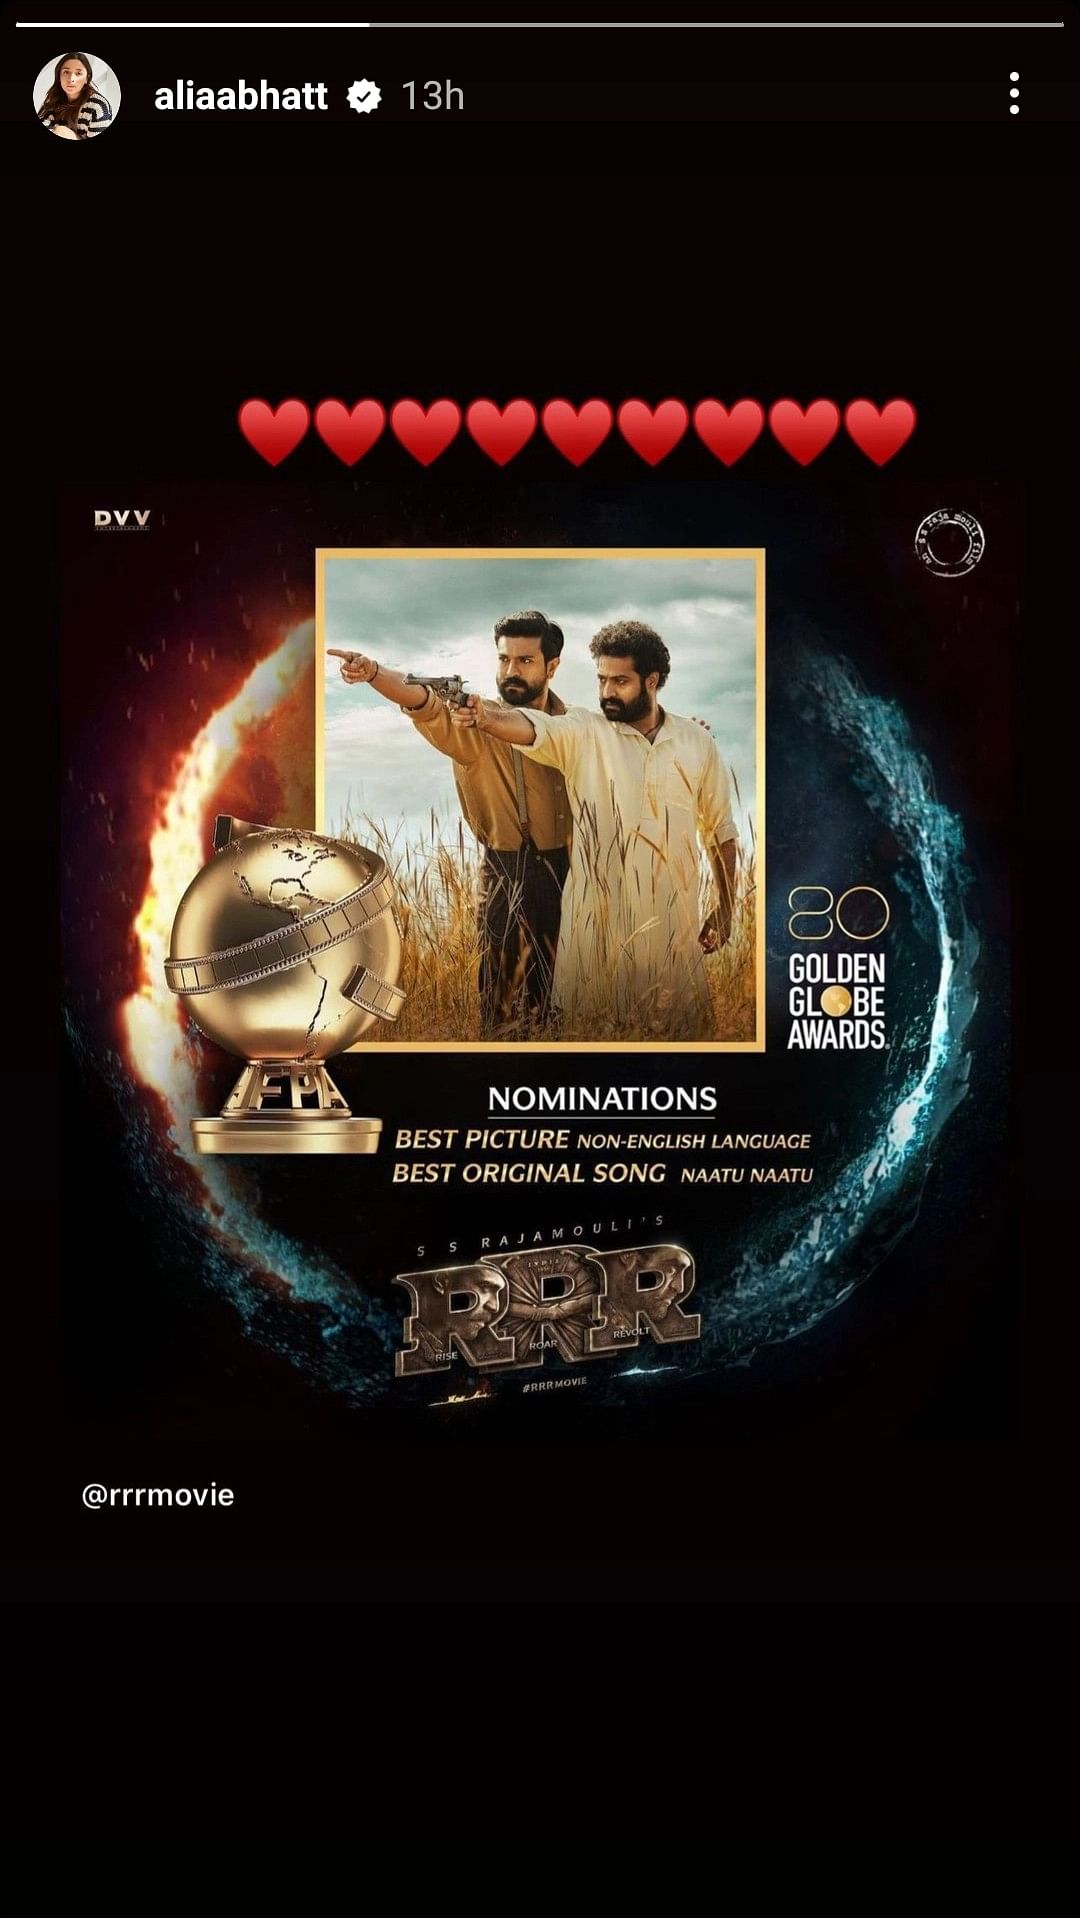 Filmmaker SS Rajamouli’s 'RRR' has been nominated for two categories for the 2023 Golden Globes.